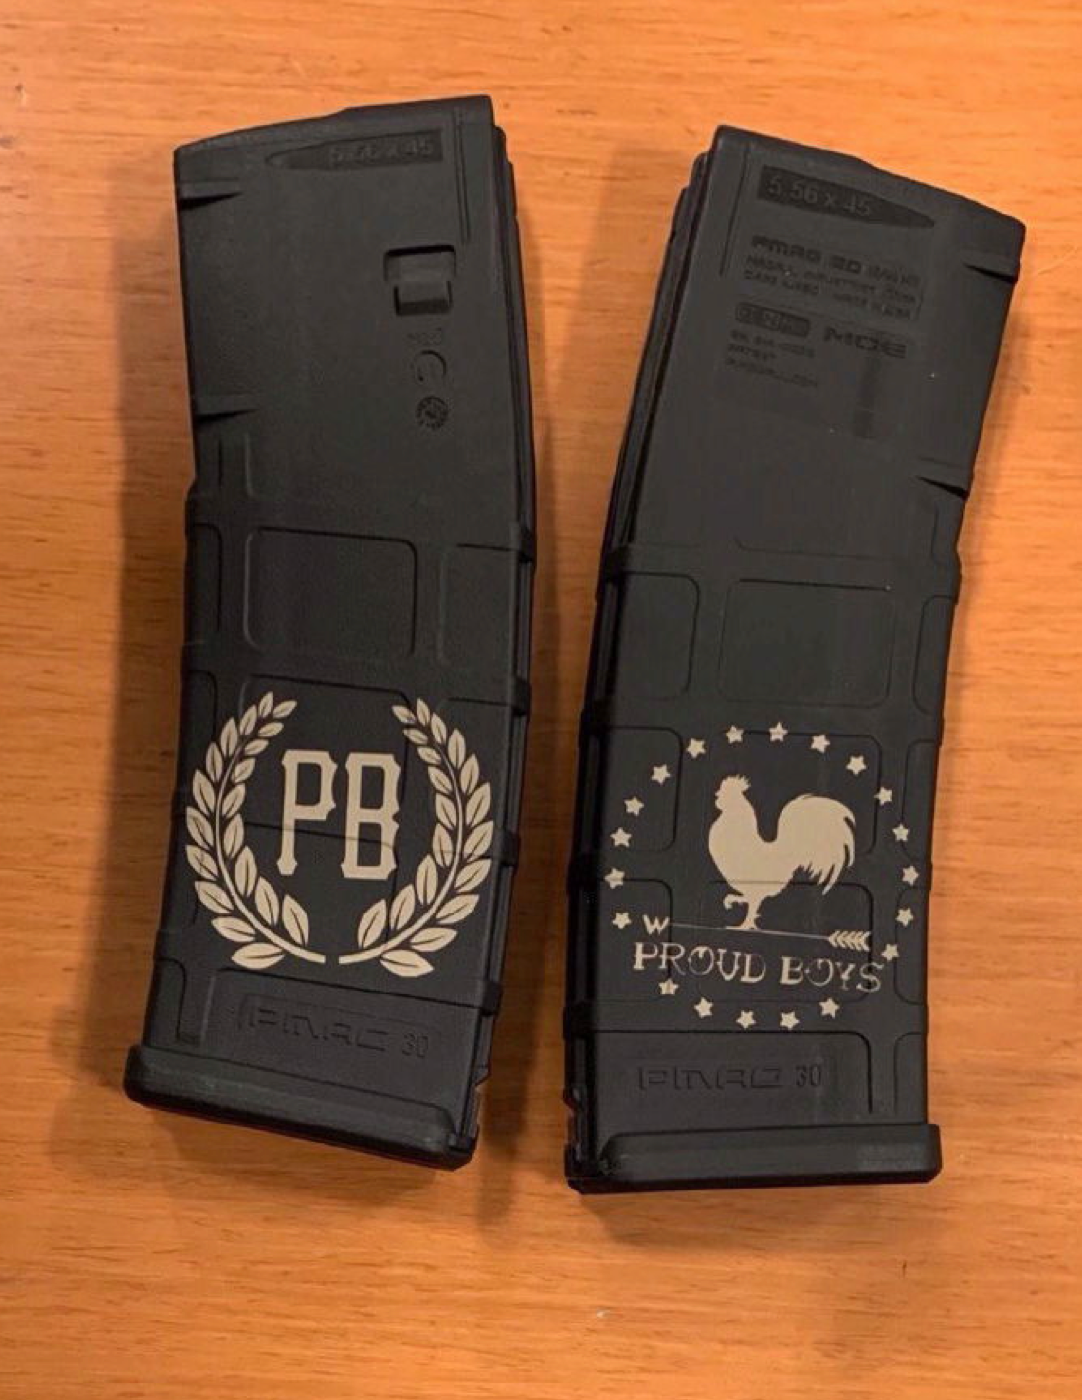 Washington DC police found two high-capacity magazines during Proud Boys leader Enrique Tarrio’s arrest on 4 January.